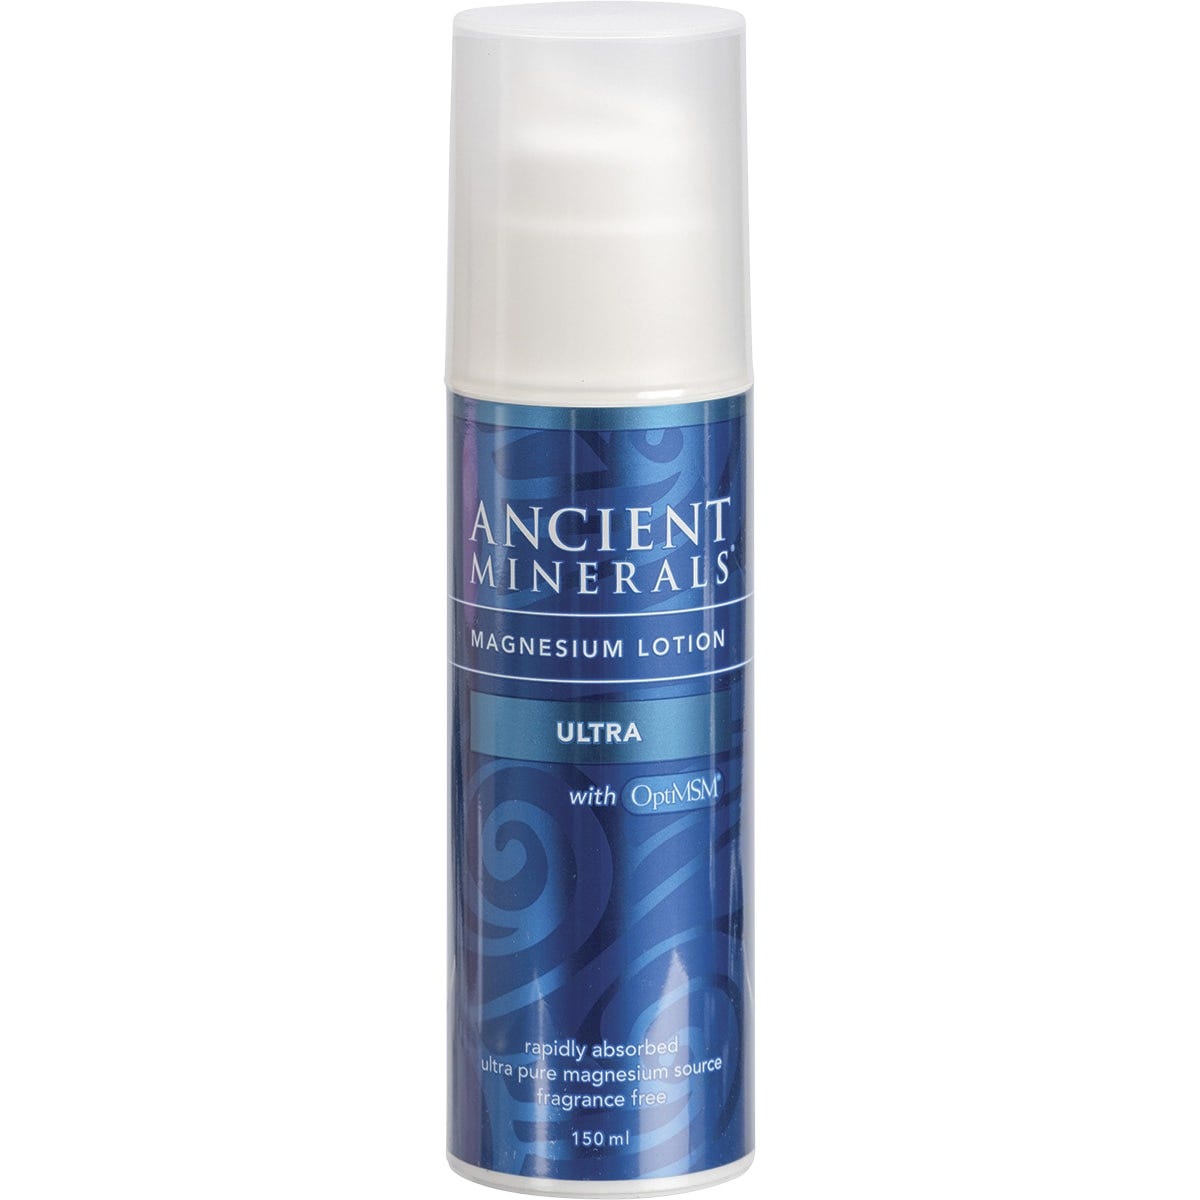 Ancient Minerals Magnesium Lotion (50%) & MSM Ultra 150ml - Dr Earth - Bath & Body, Magnesium & Salts